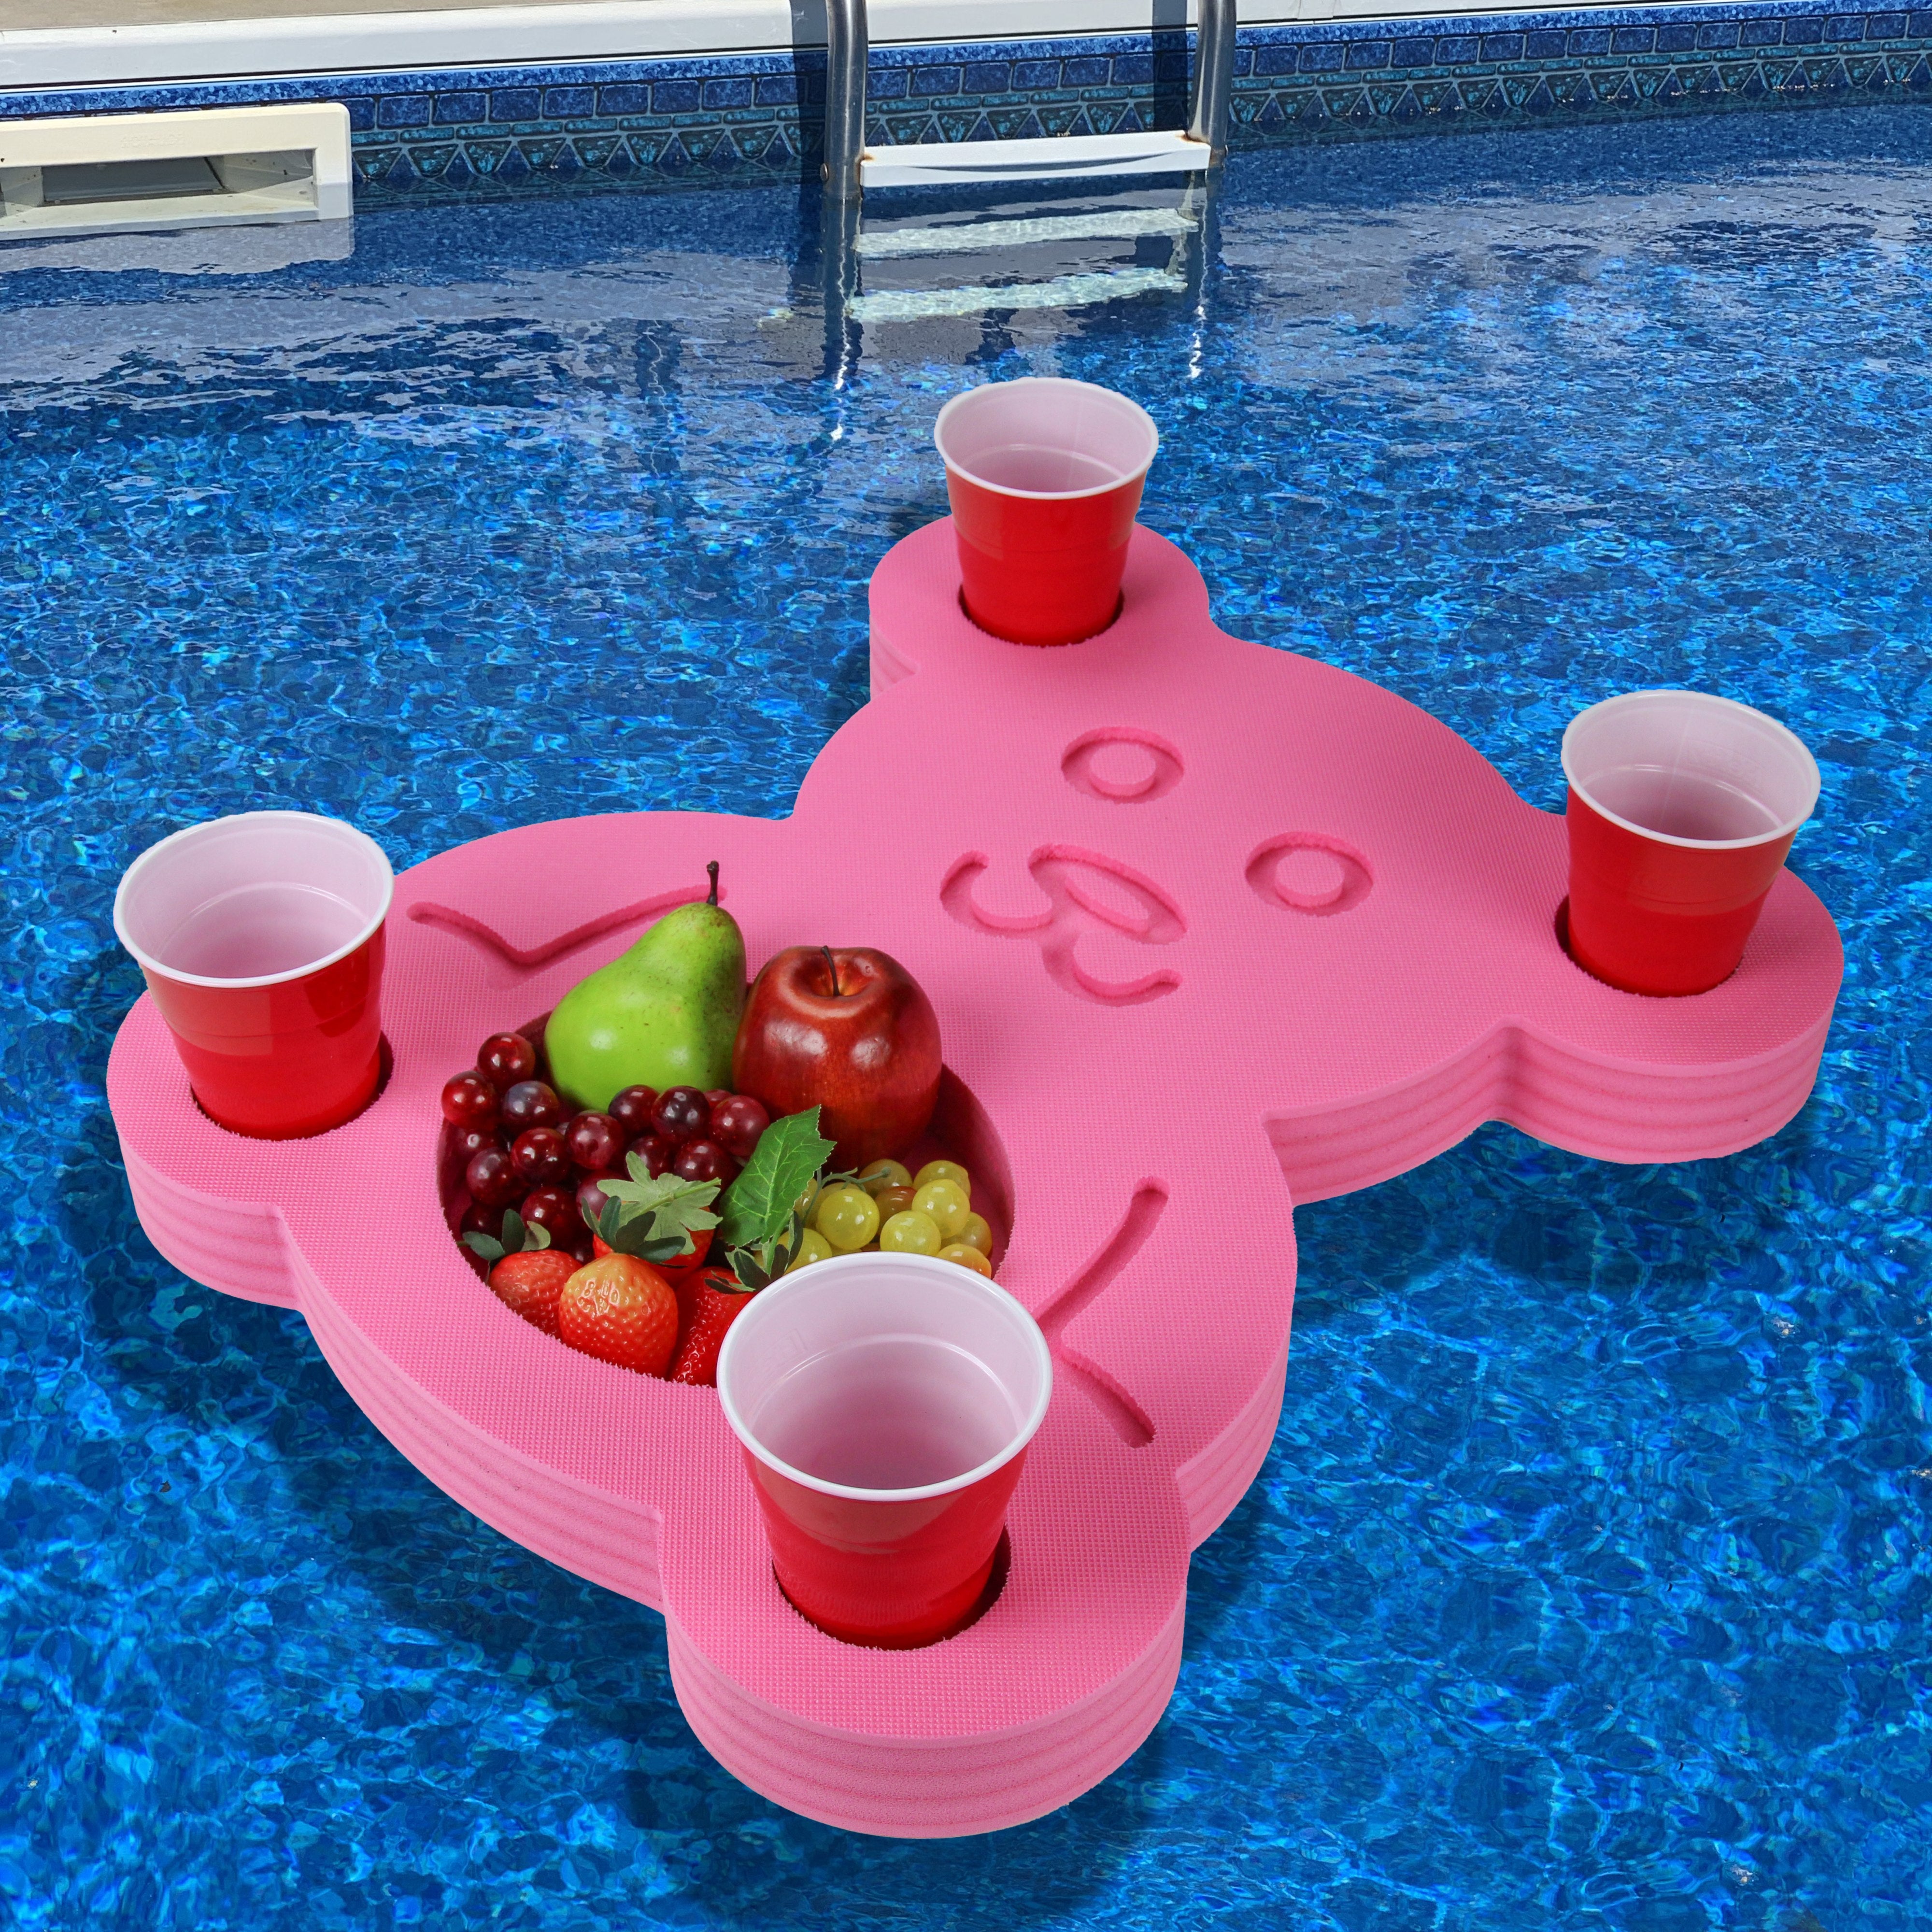 Teddy Bear Shaped Drink Holder Refreshment Table Tray PoolBeach Party Float Lounge Durable Foam 5 Compartment UV Resistant Cup Holders 23.37 Inches